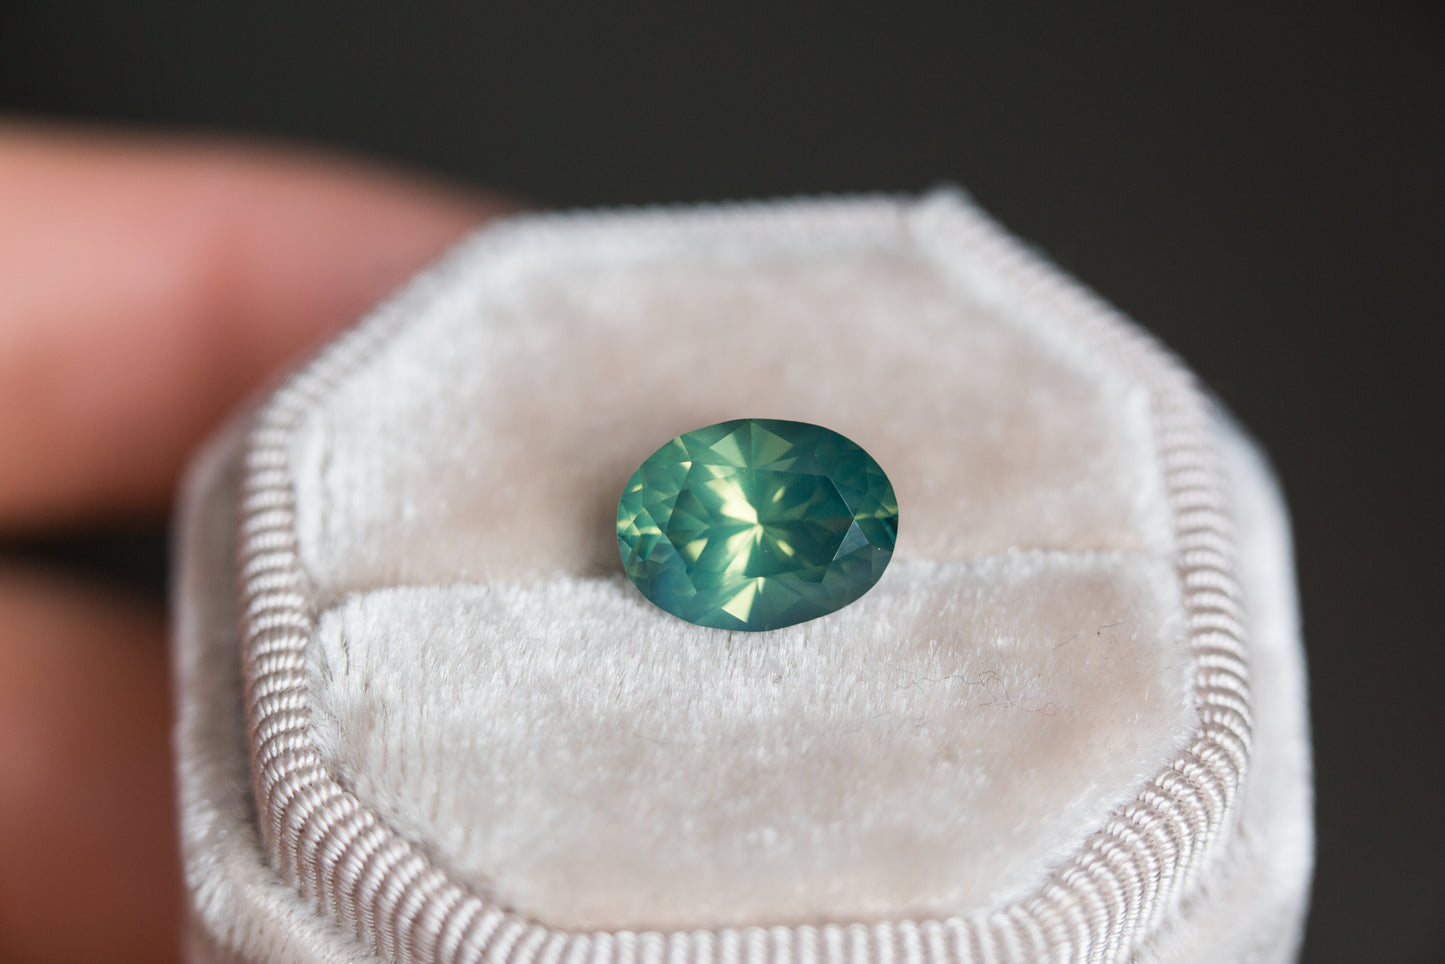 4.64ct oval opalescent teal green sapphire